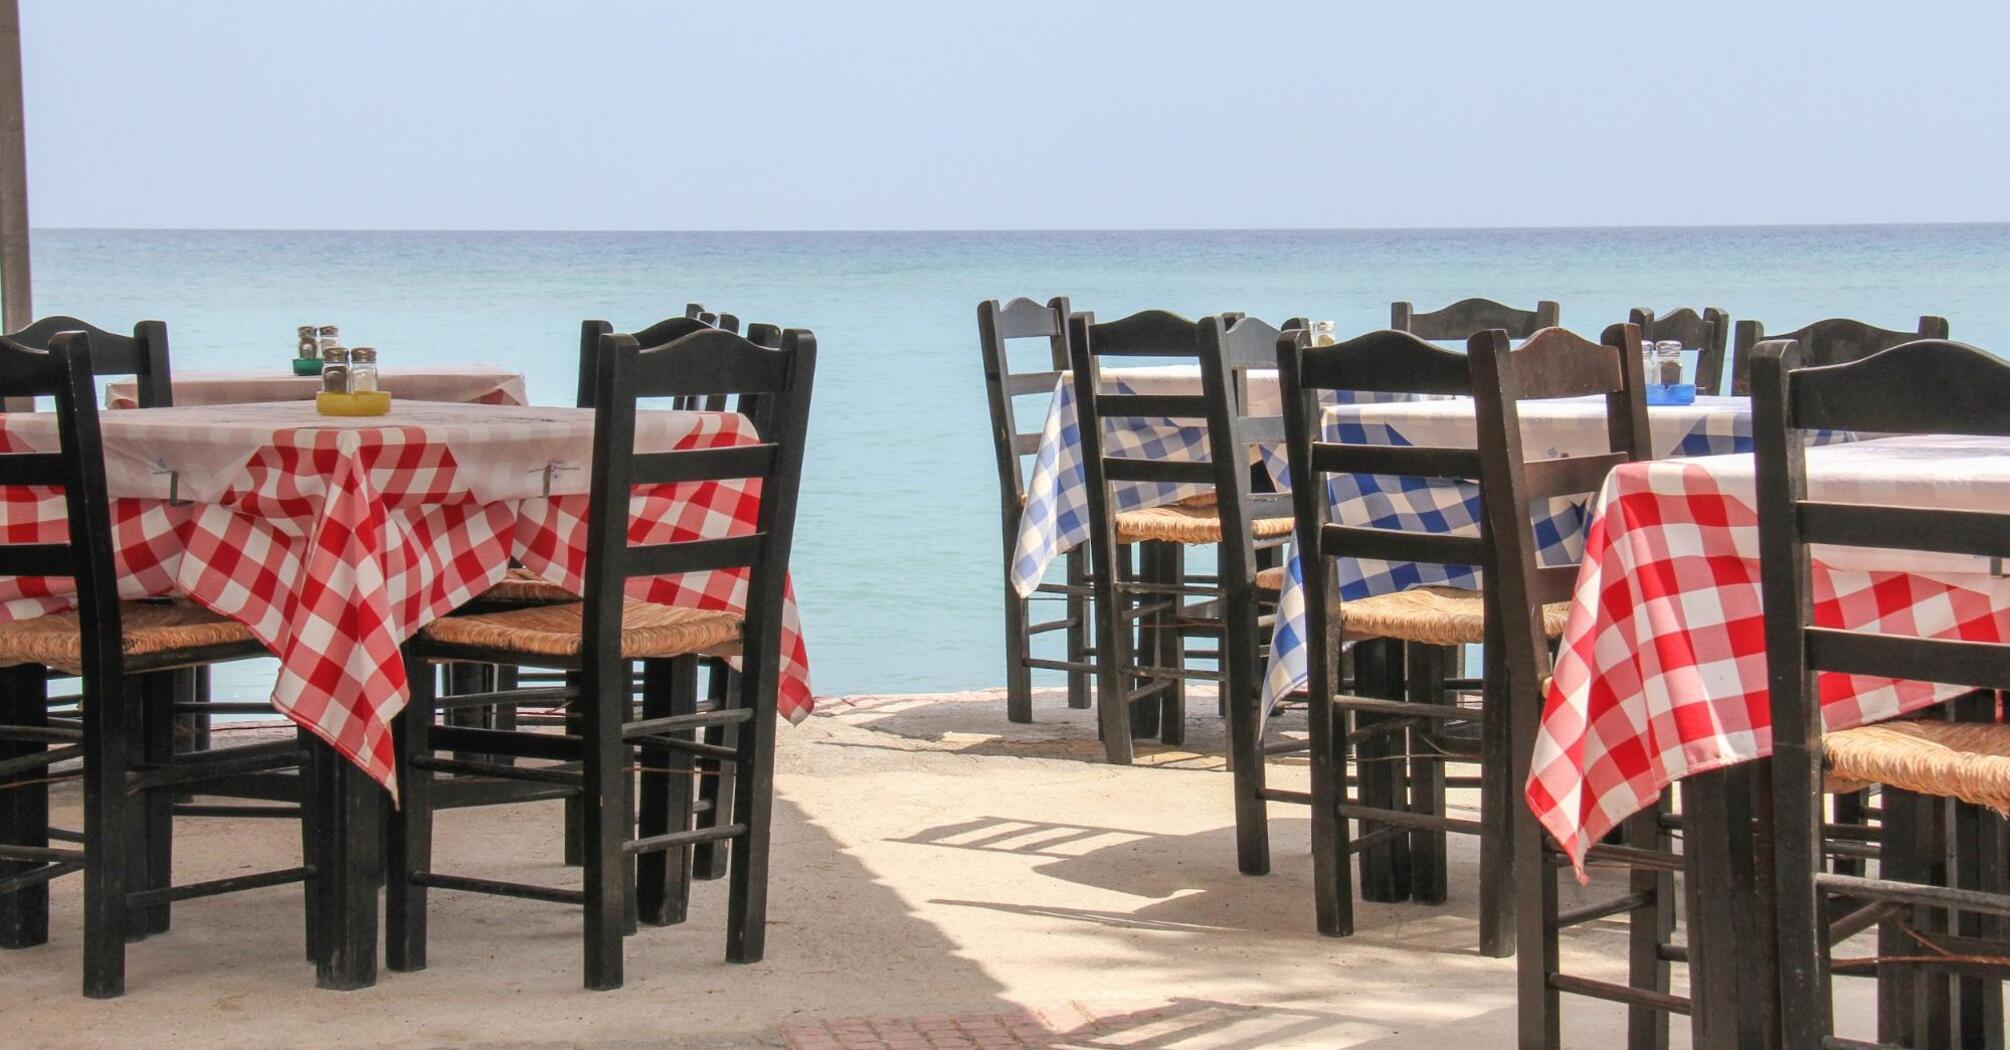 The view of the blue horizon and clear sky creates the perfect atmosphere for dining